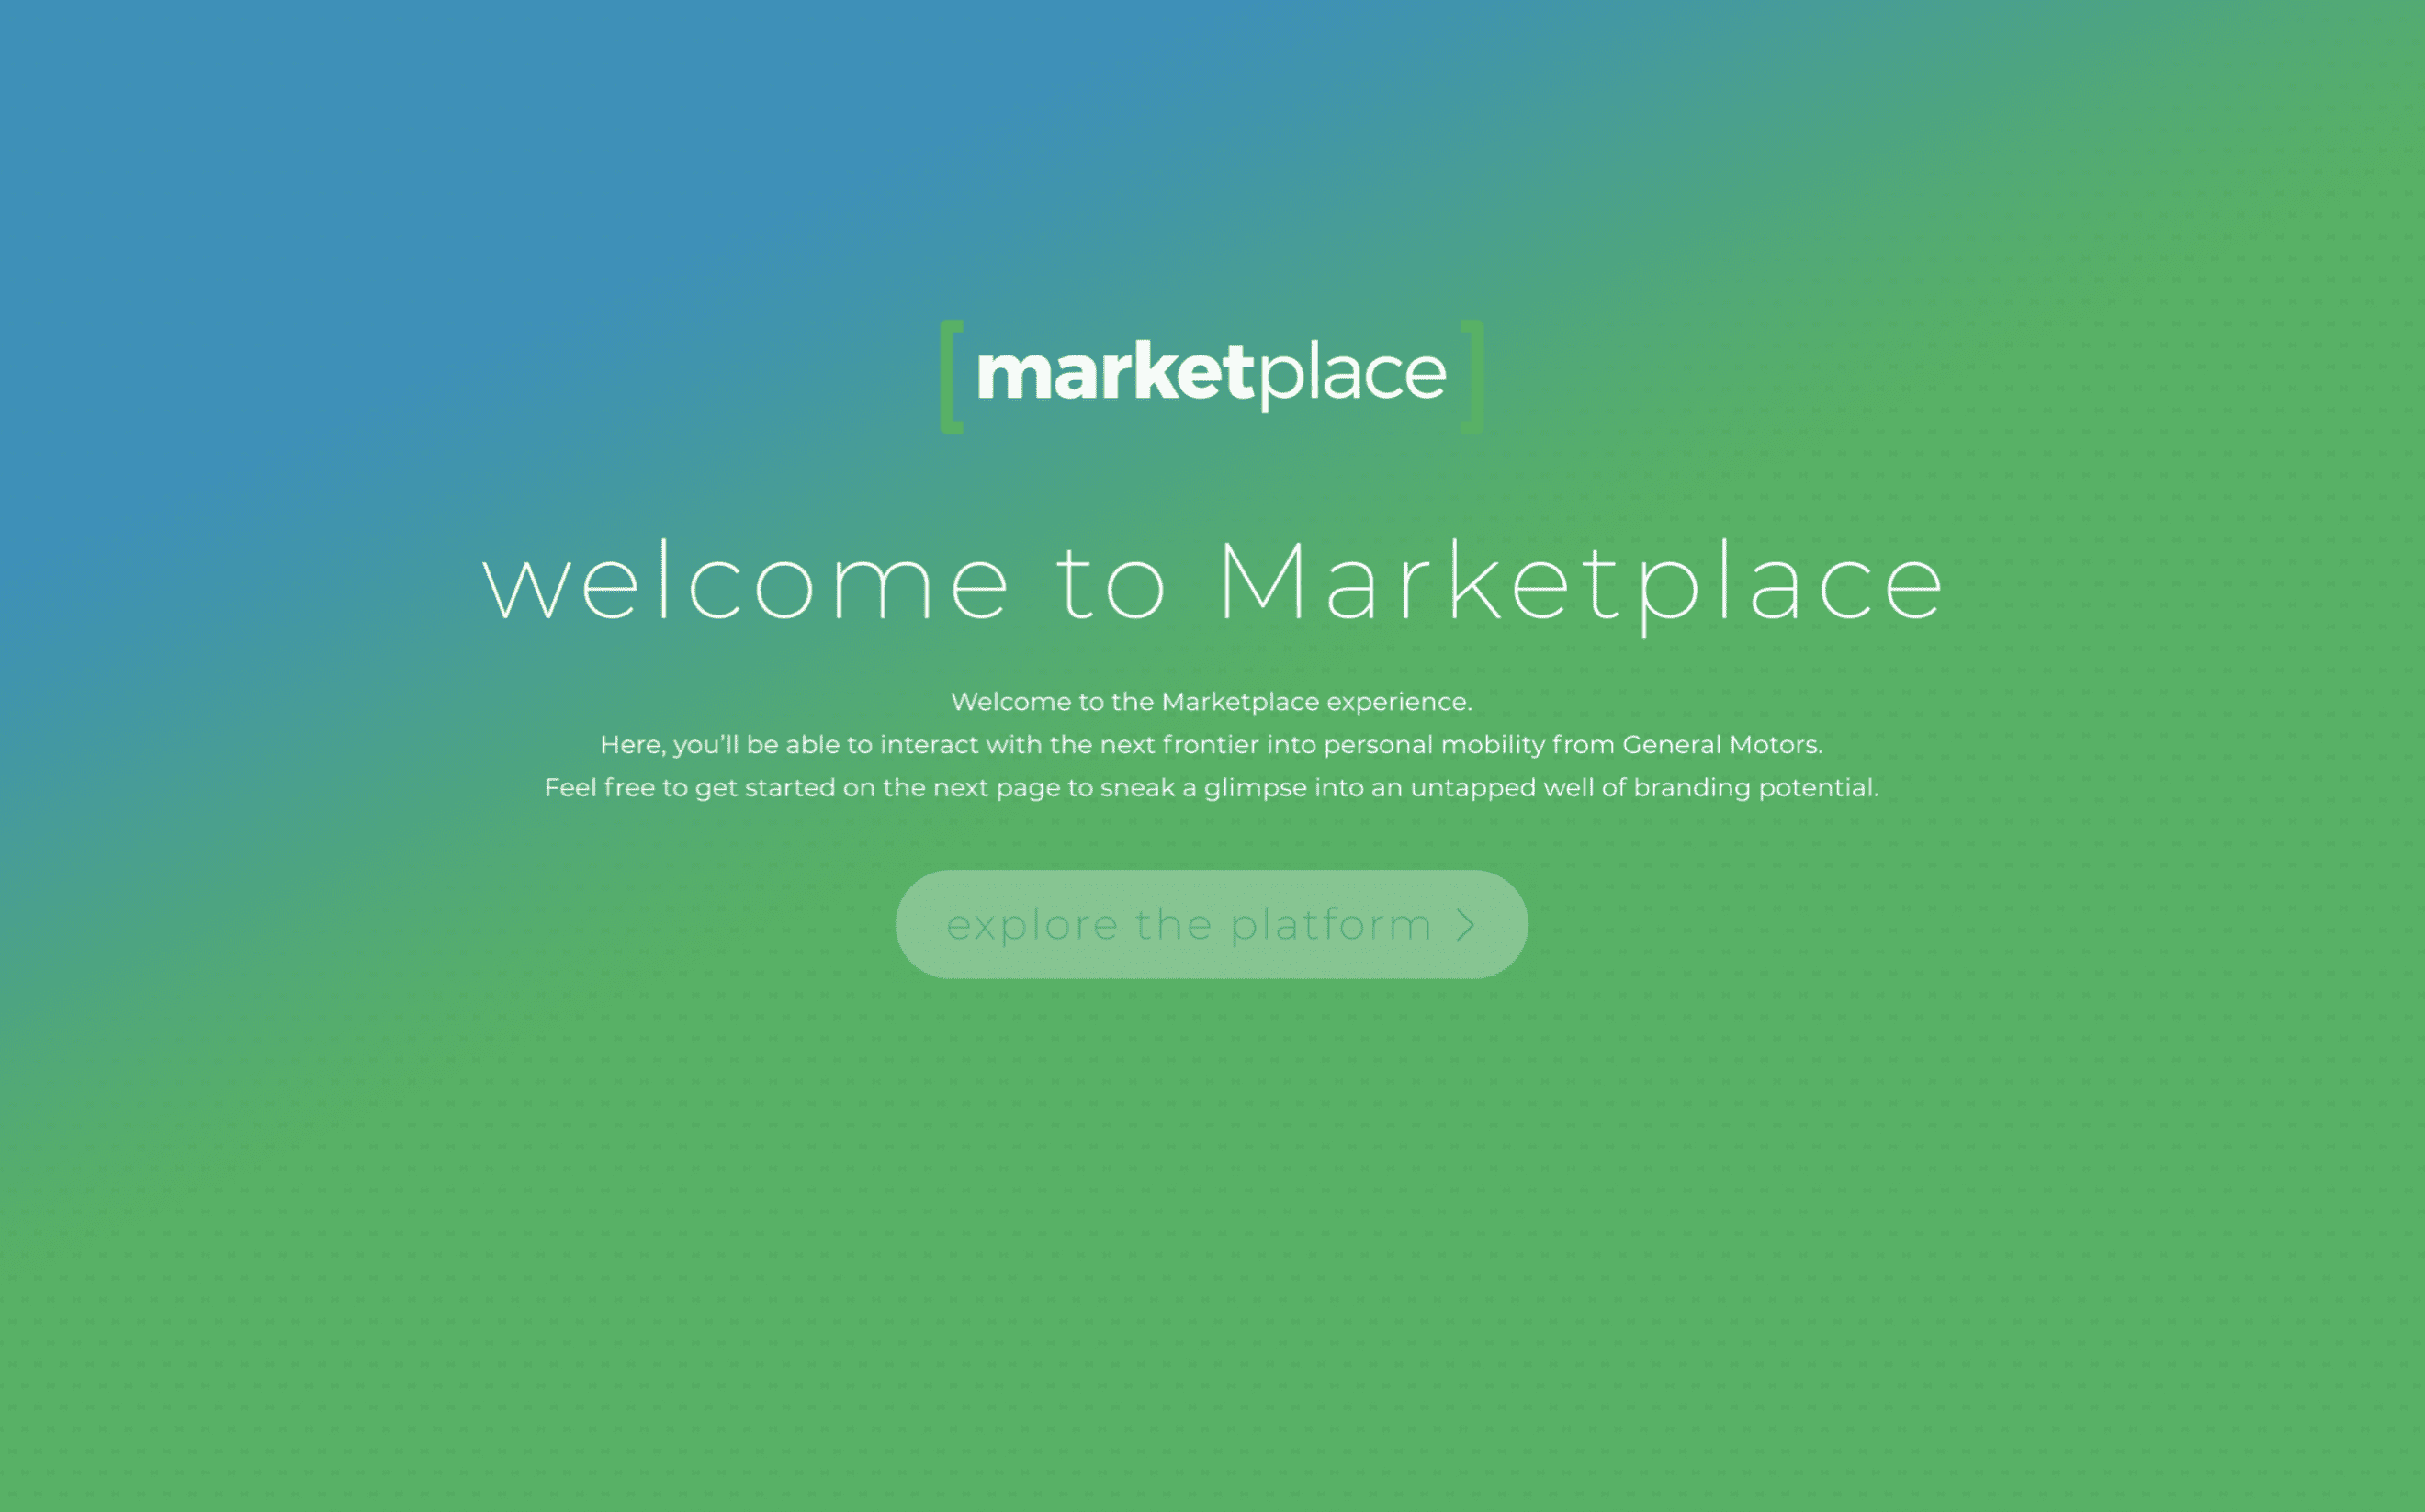 GM-marketplace-welcome